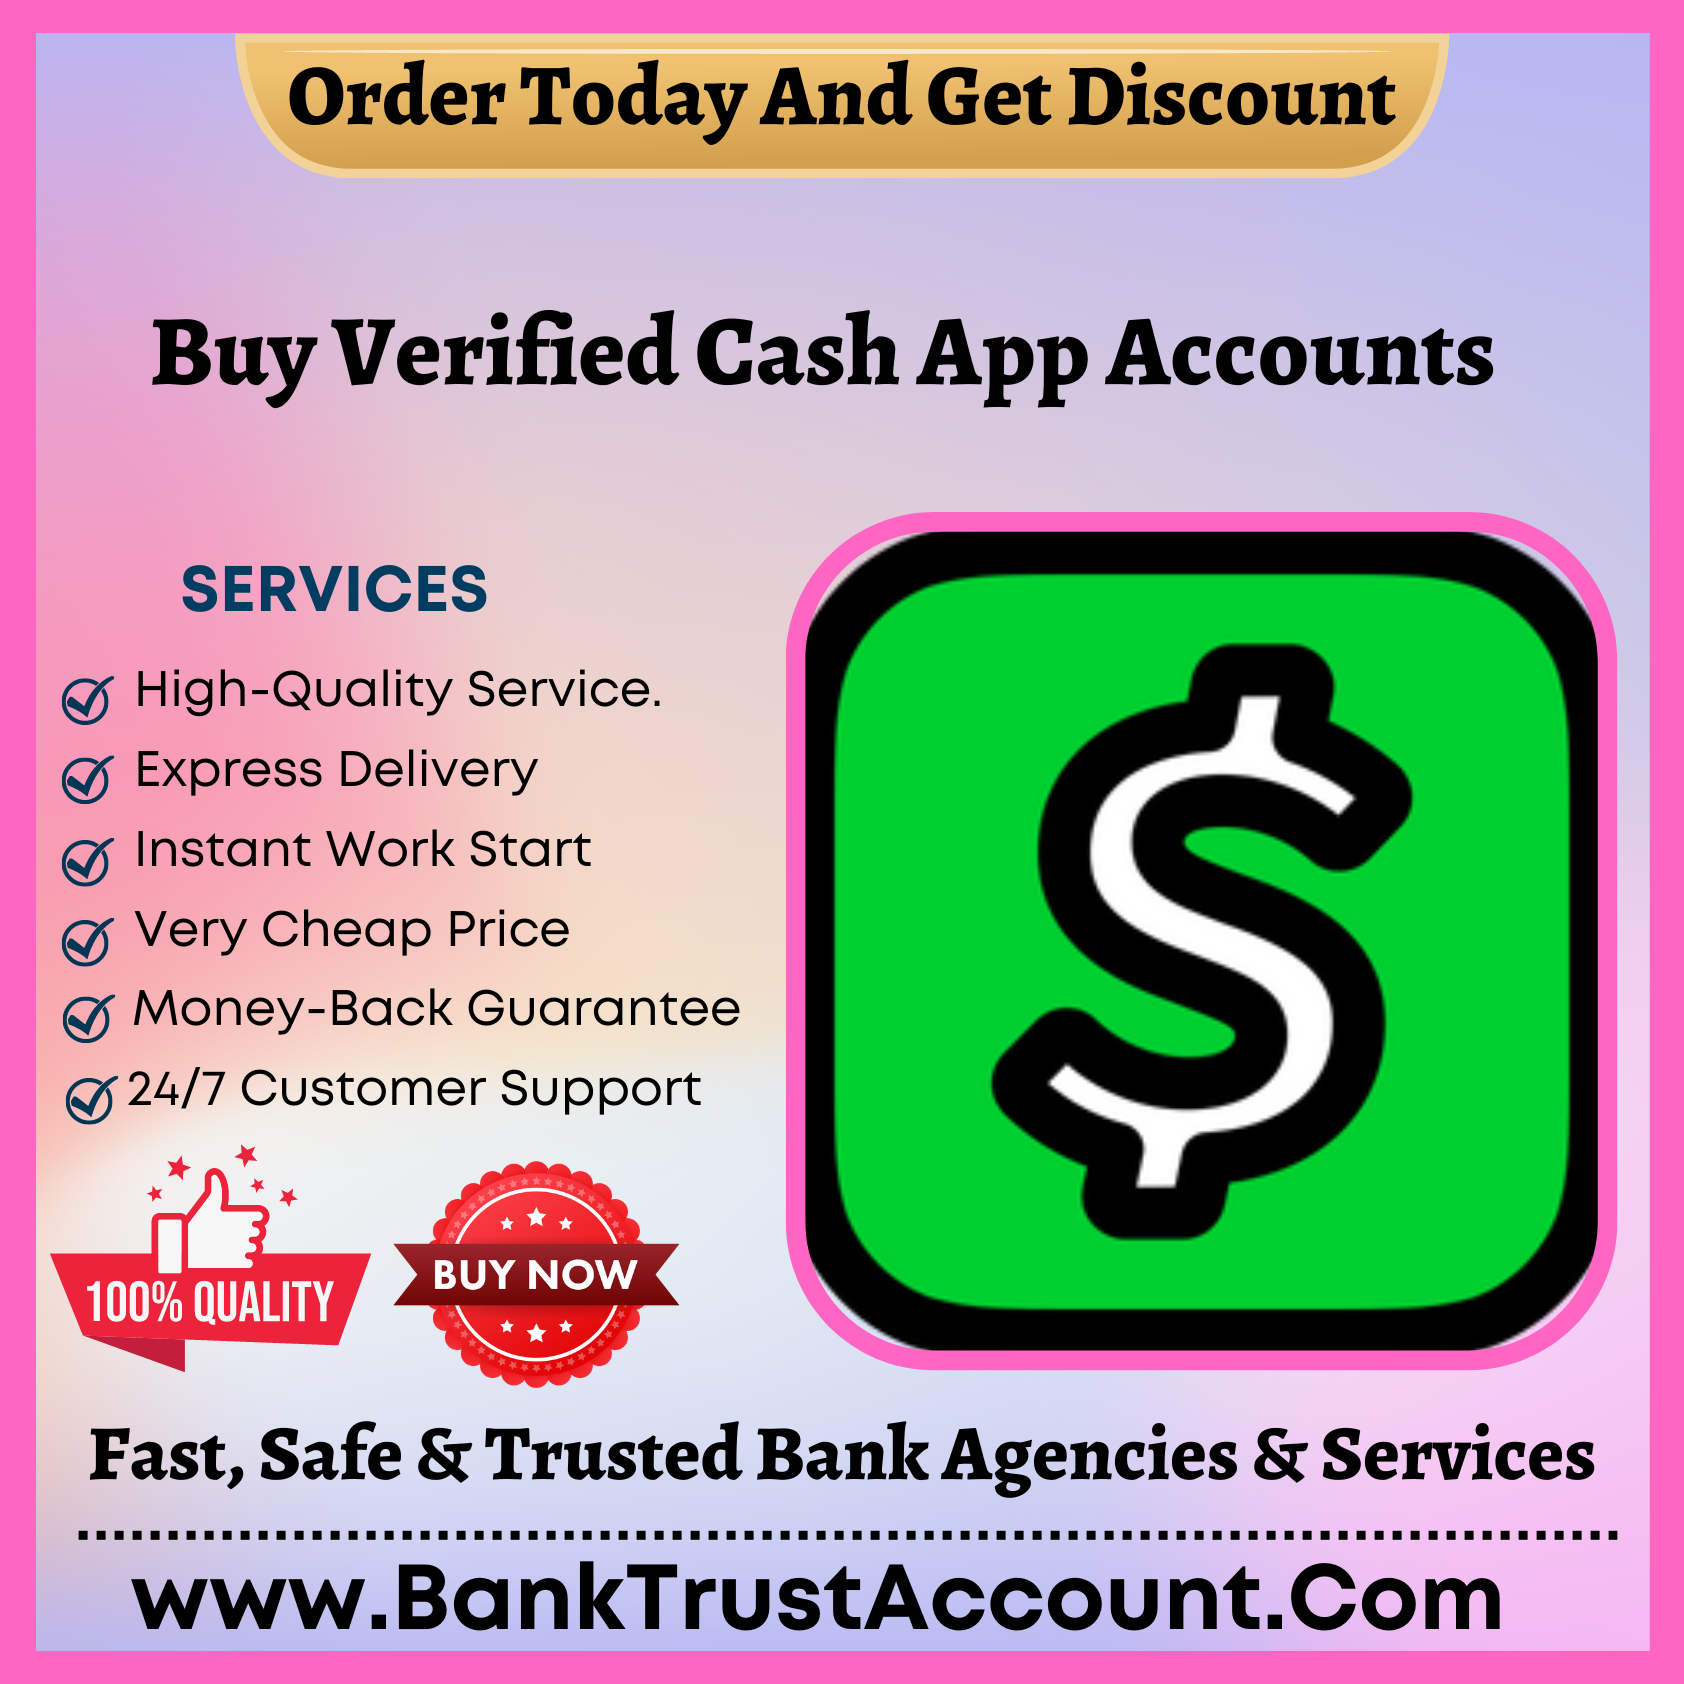 Buy Verified Cash App Accounts - BTC Enable OLD and NEW